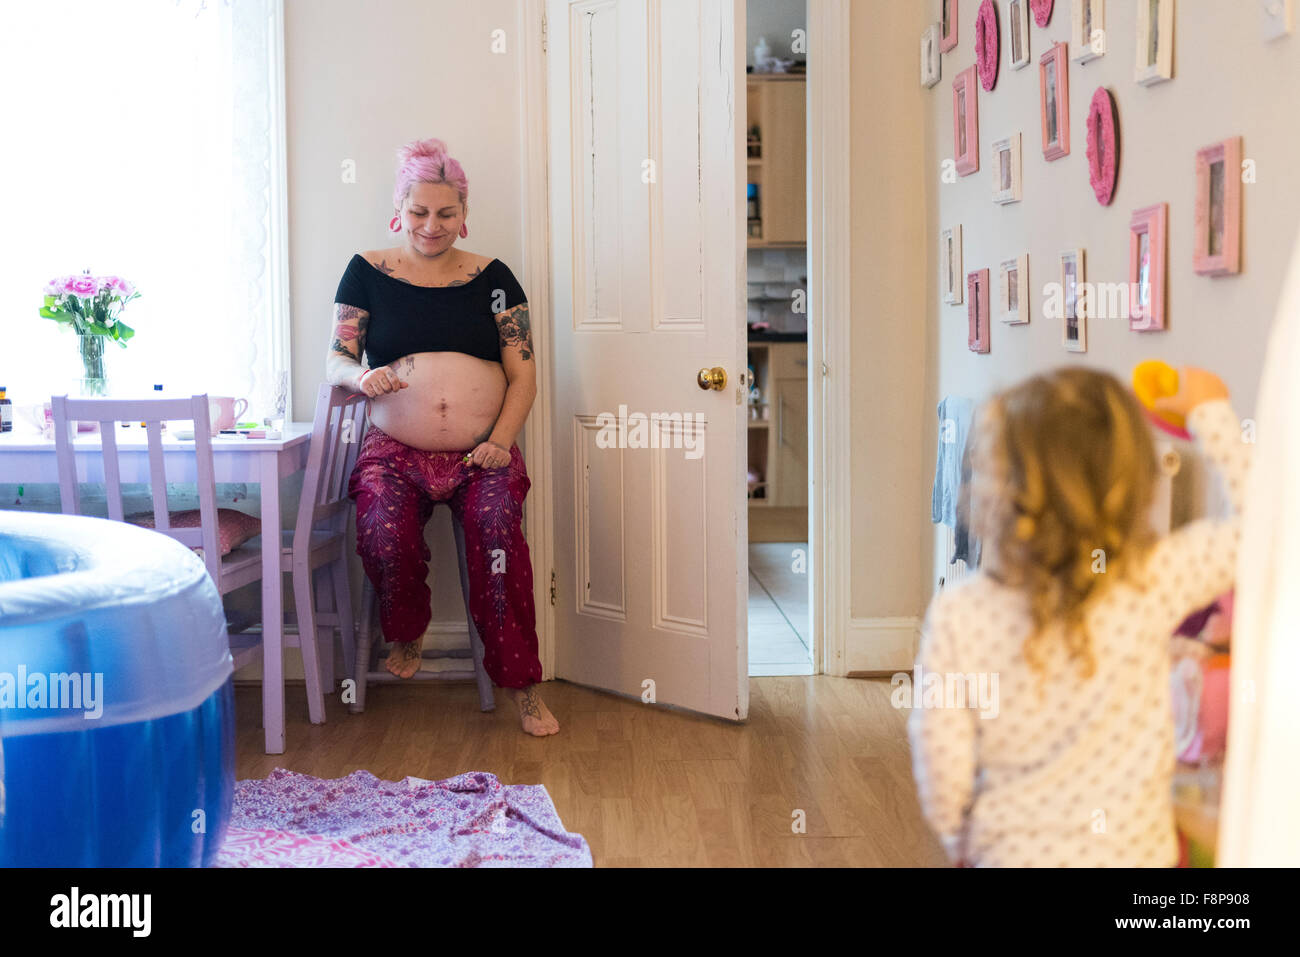 Pregnant woman in labour with her son in the room during an unassisted home birth (freebirth) Stock Photo